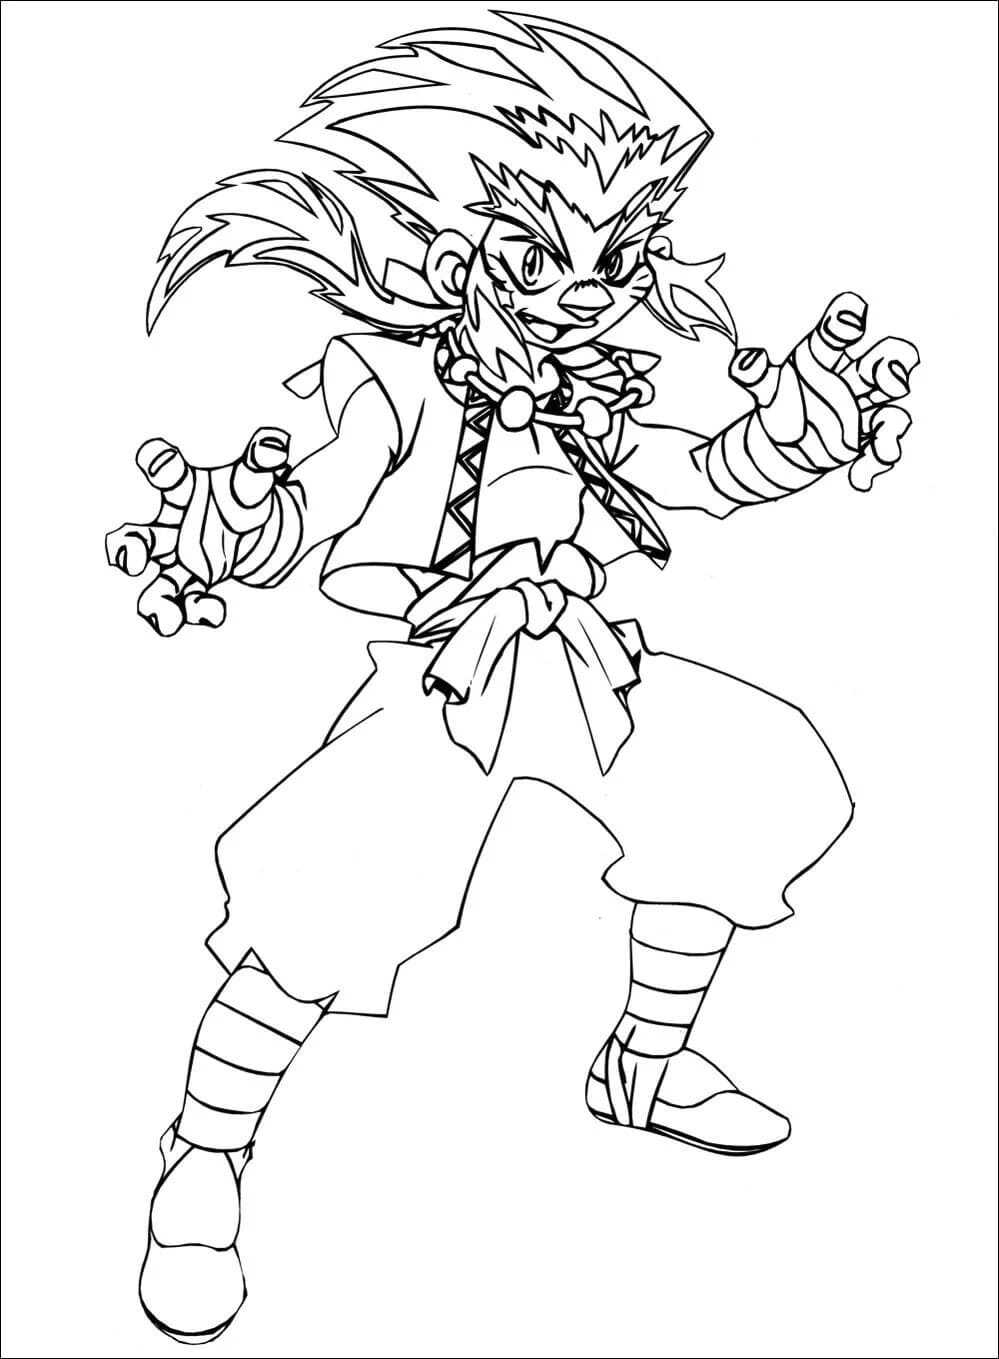 Forward To The Victory Coloring Page